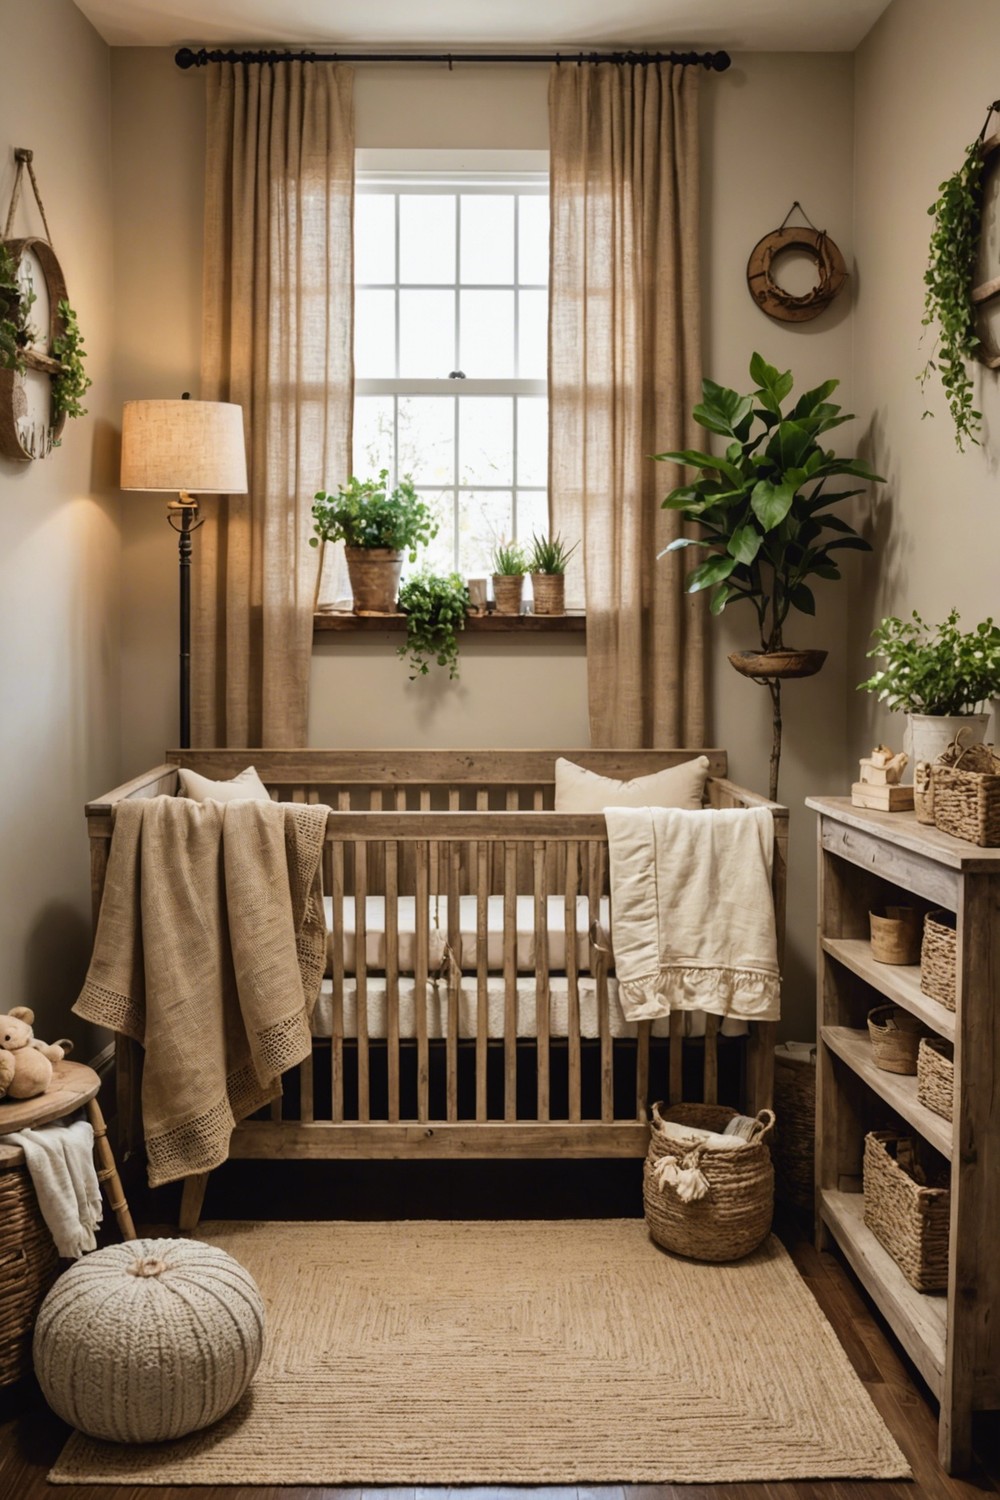 Rustic Charm with Burlap Accents